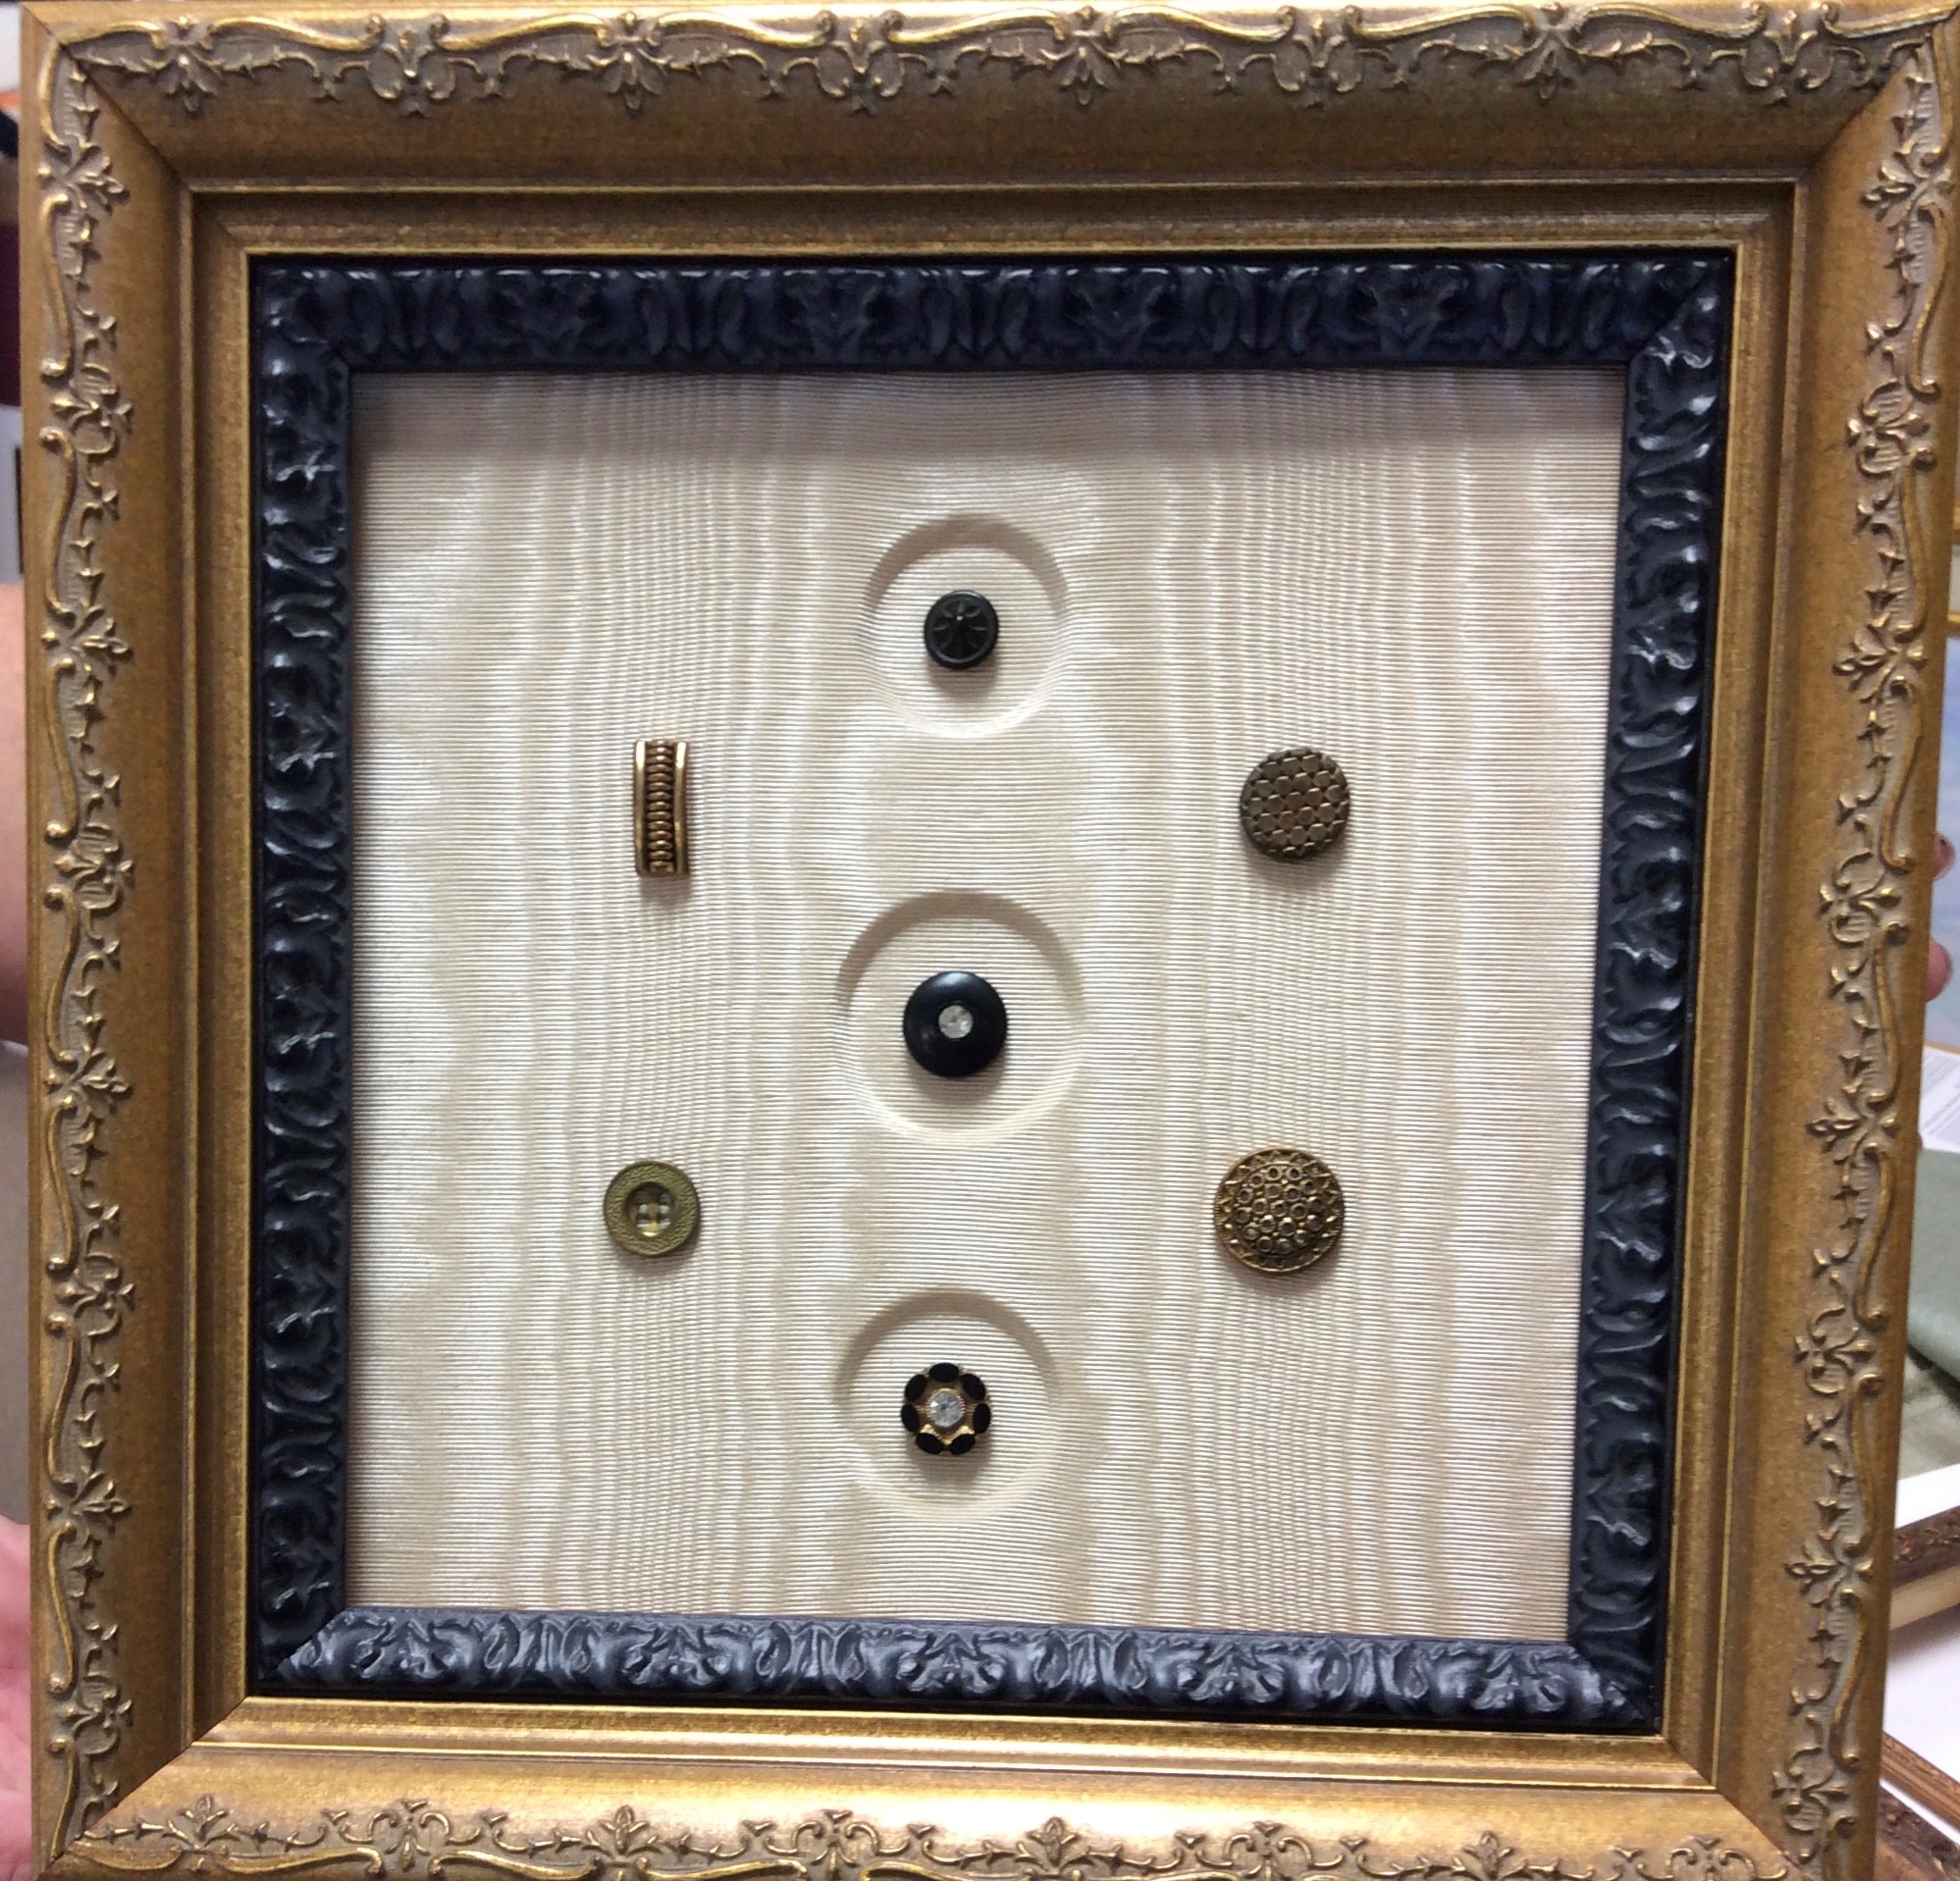 Buttons in frame for Mother's Day